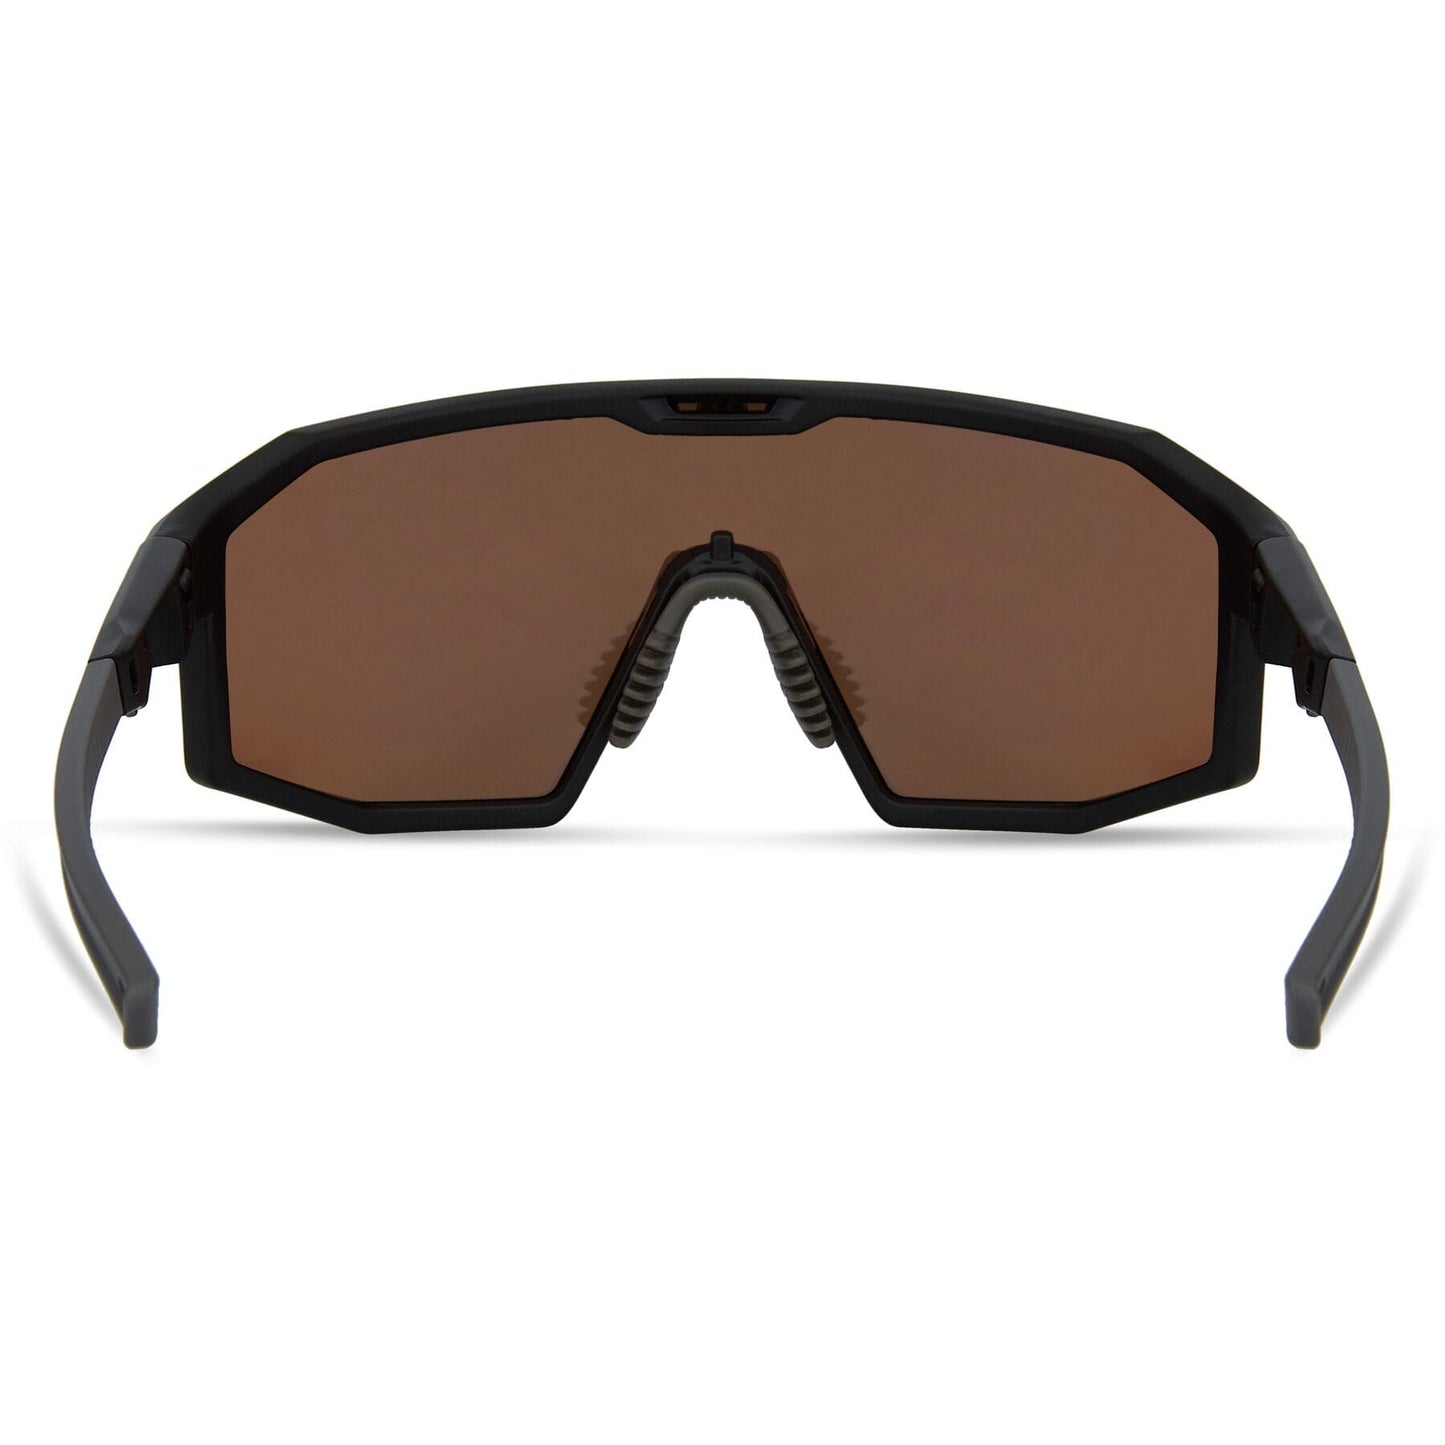 Madison Enigma Glasses - 3 pack - matt black / bronze mirror / amber and clear lens